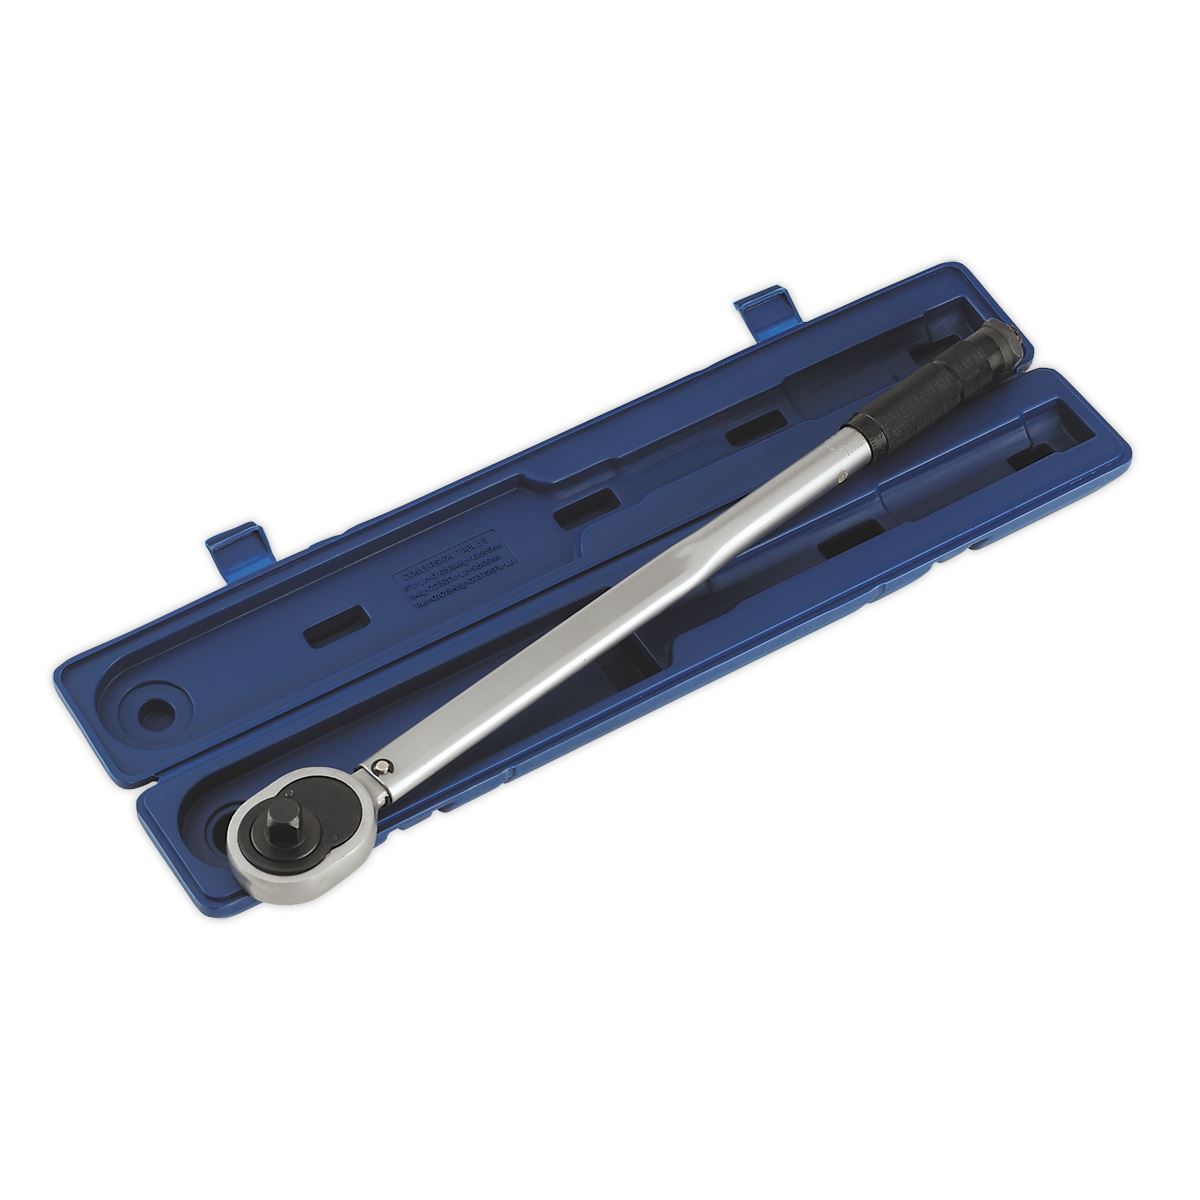 Sealey Premier Micrometer Torque Wrench 3/4"Sq Drive Calibrated